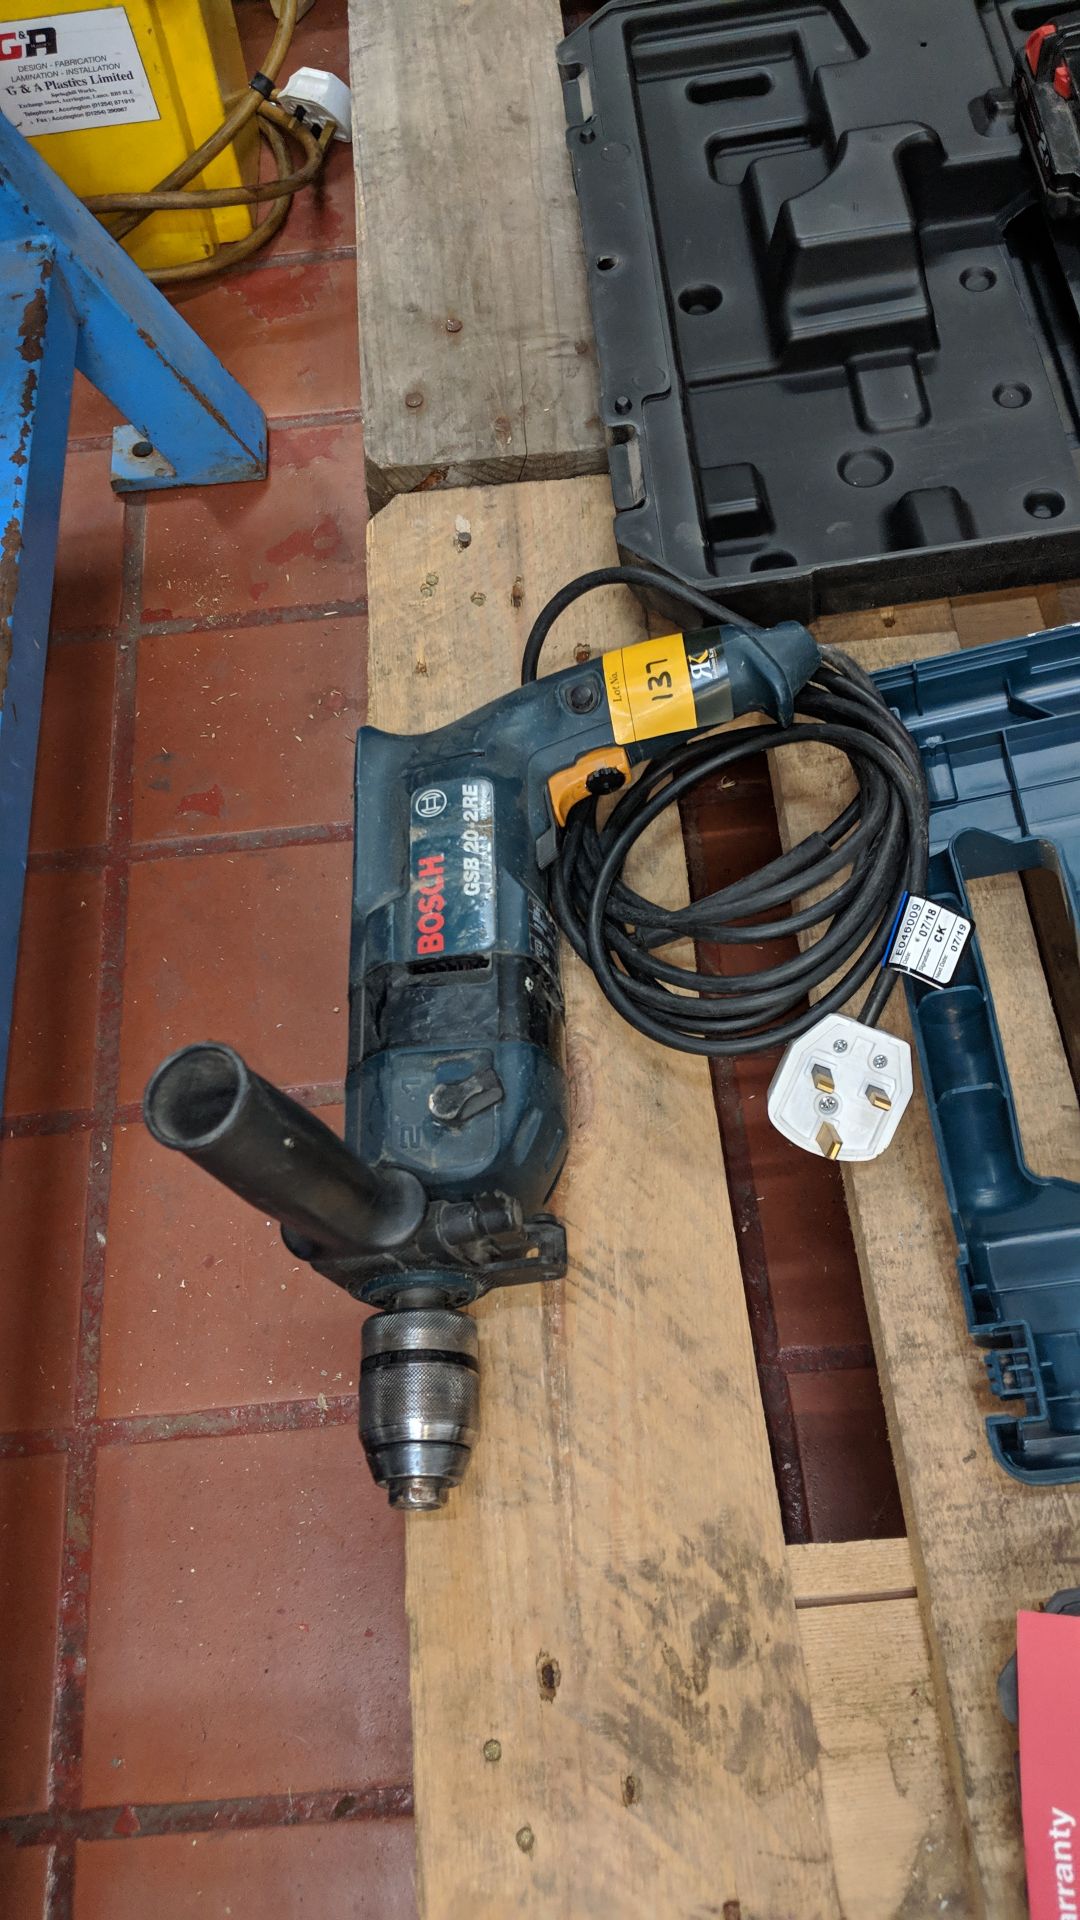 Bosch GSB 20-2RE professional corded drill This is one of a large number of lots in this sale - Image 3 of 4